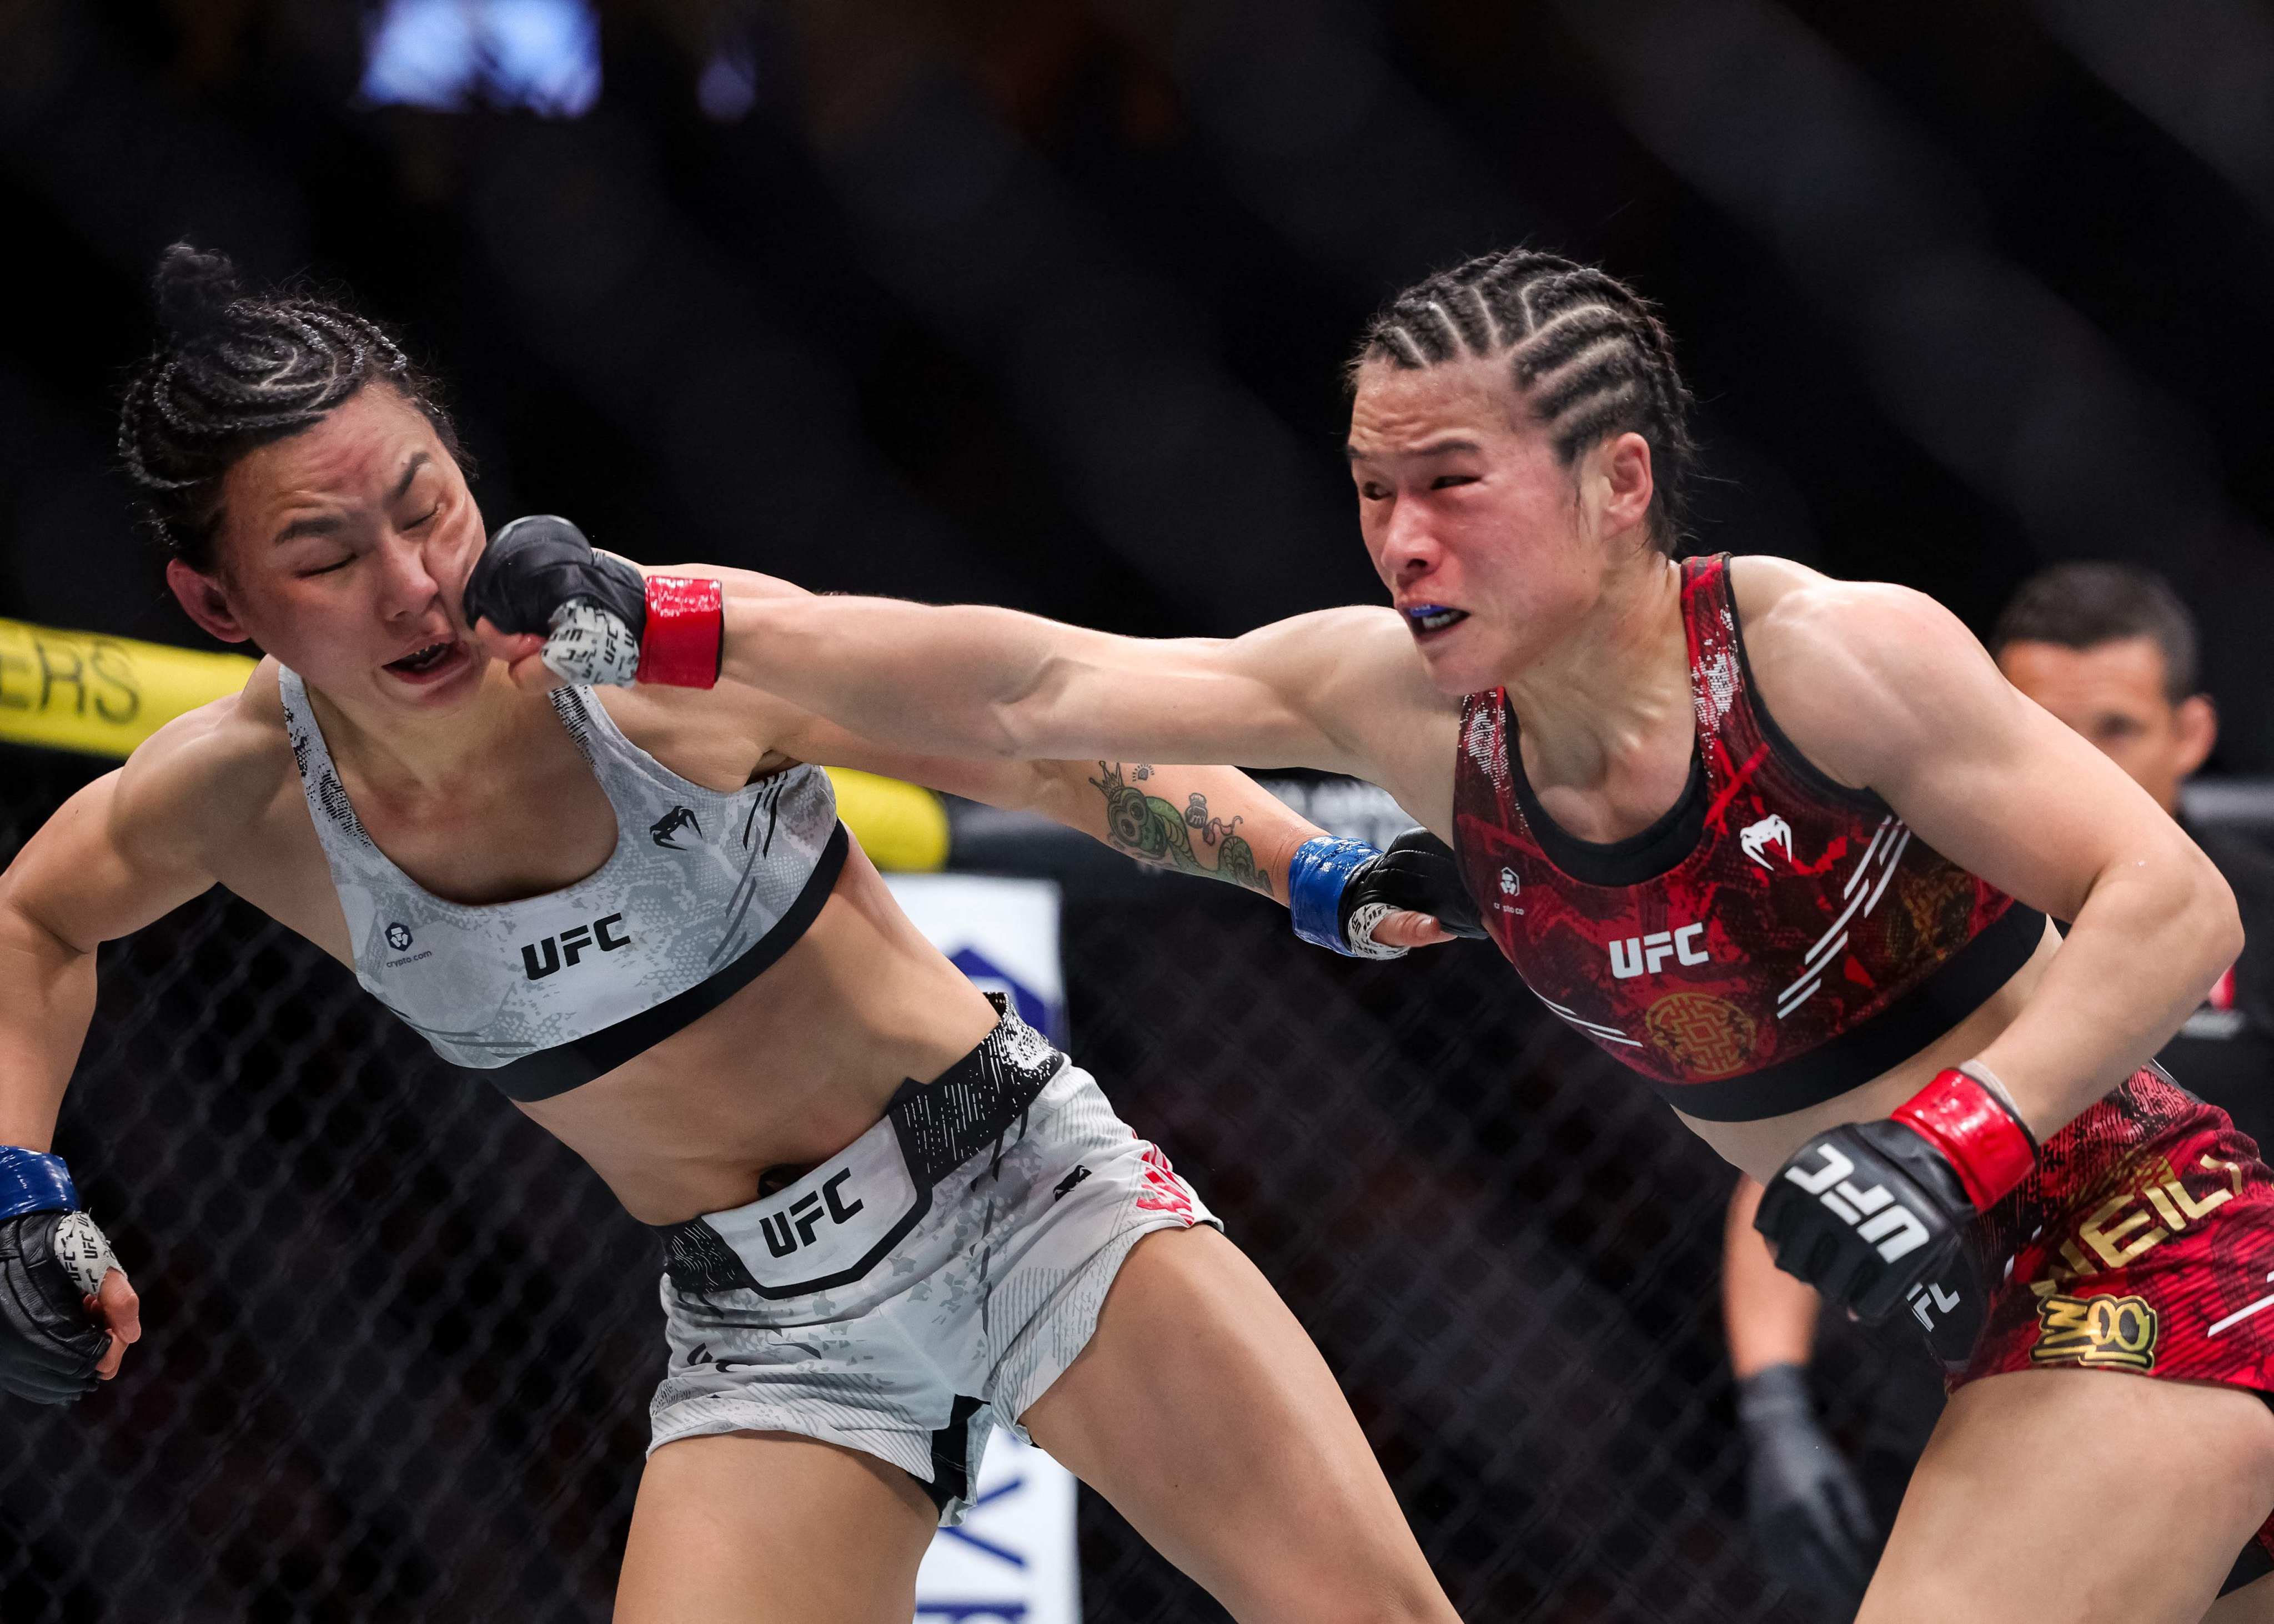 Zhang Weili punches Yan Xiaonan during their strawweight championship fight in Las Vegas. Photo: Getty Images via AFP